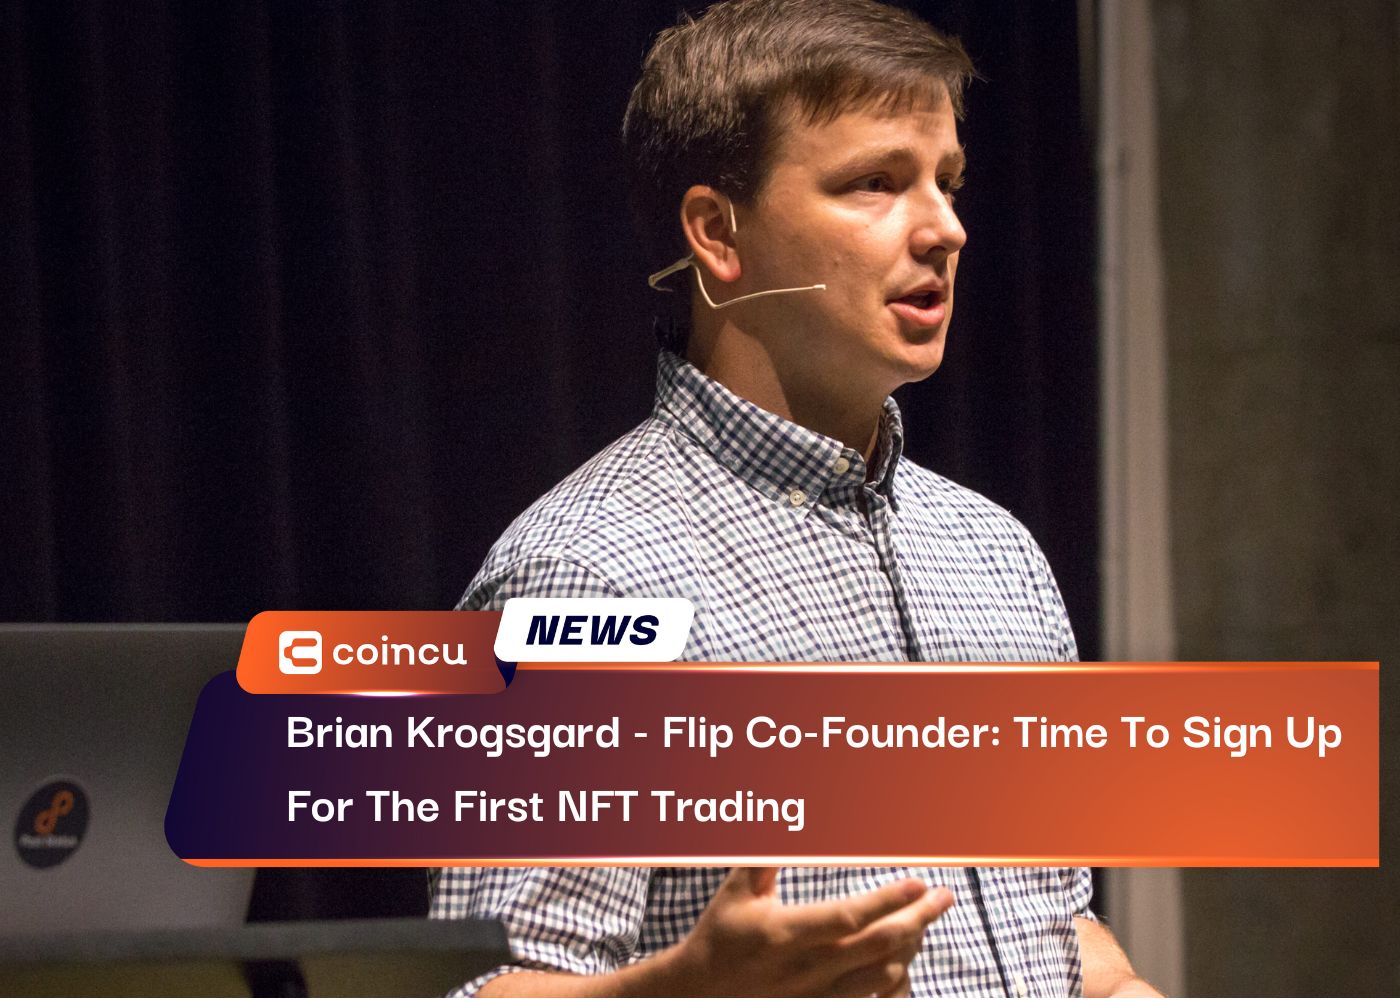 Brian Krogsgard - Flip Co-Founder: Time To Sign Up For The First NFT Trading